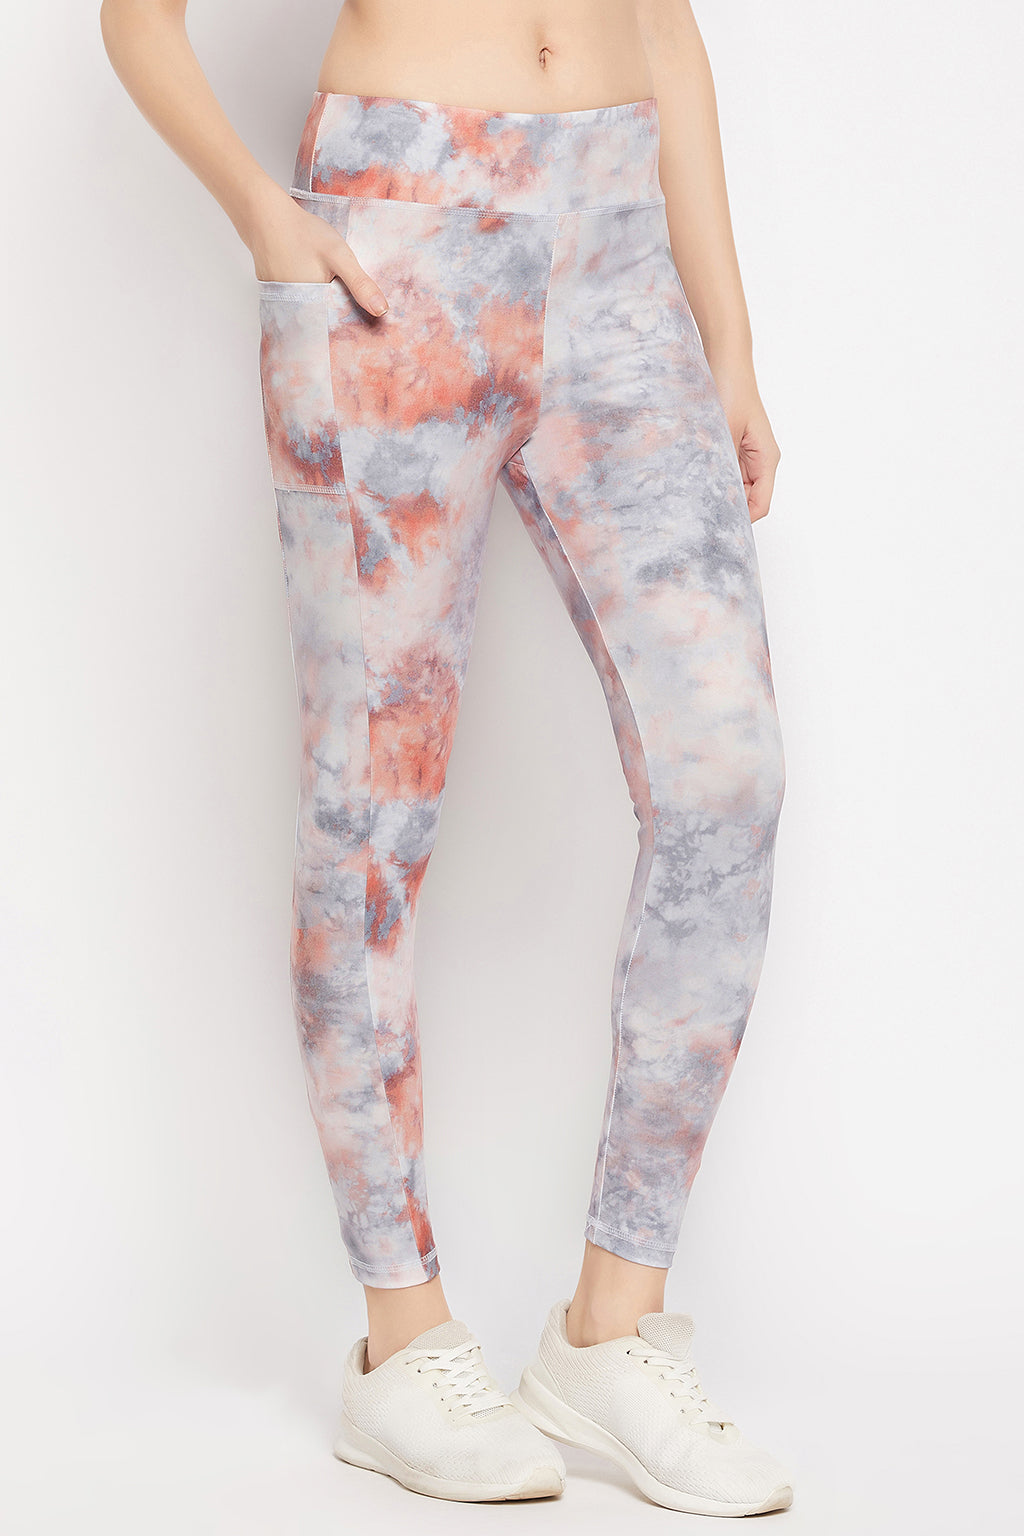 Grey High Rise Tie-Dye Print Active Tights with Side Pocket